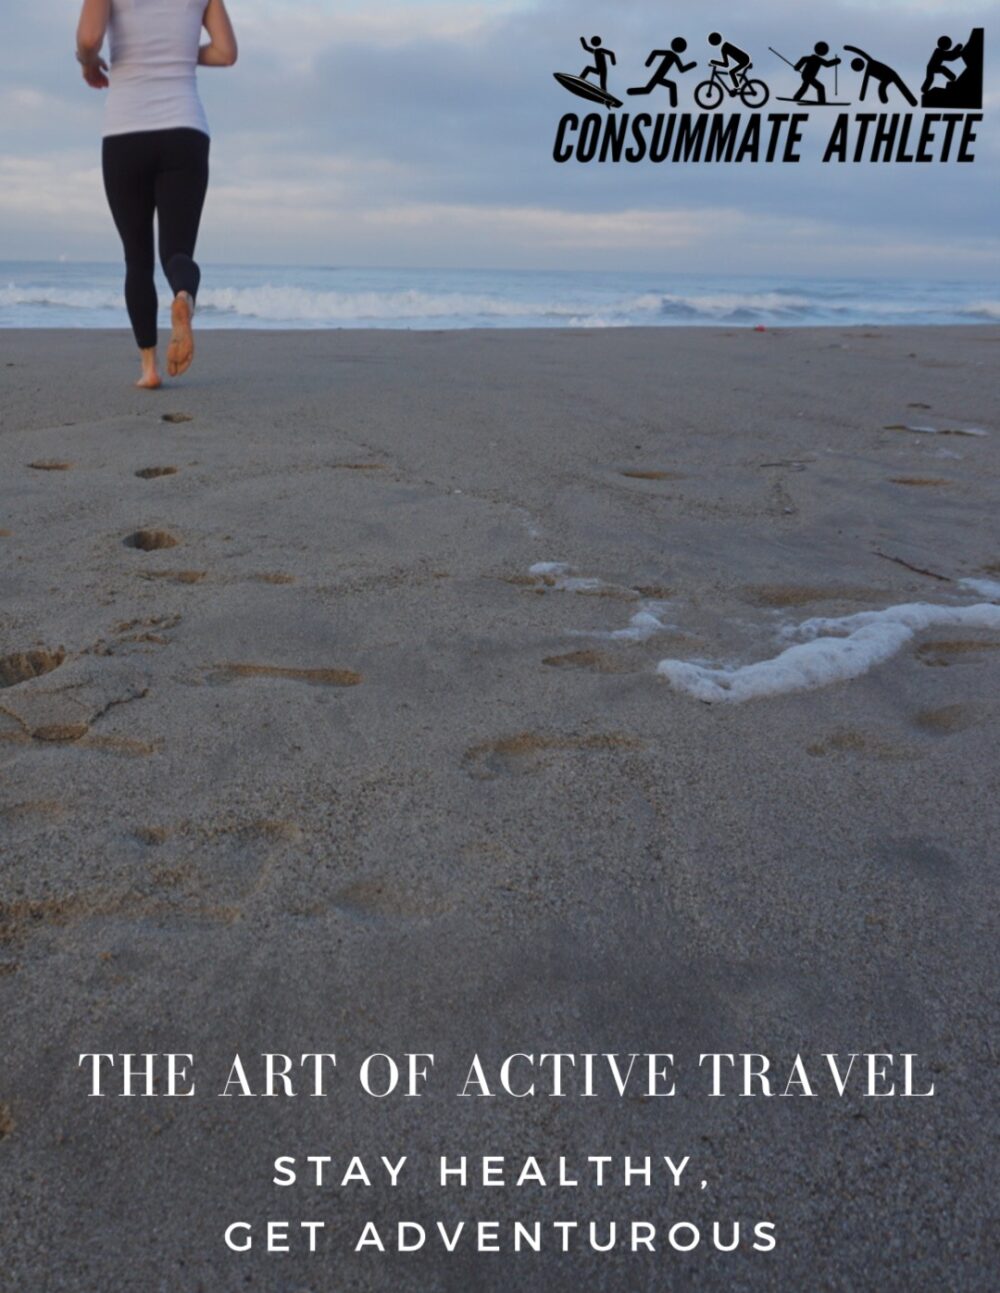 A person runs on a beach leaving footprints in the sand. The ocean is in the background with waves gently crashing. The text reads, "Consummate Athlete" with a logo featuring various sports icons and "The Art of Active Travel - Stay Healthy, Get Adventurous.